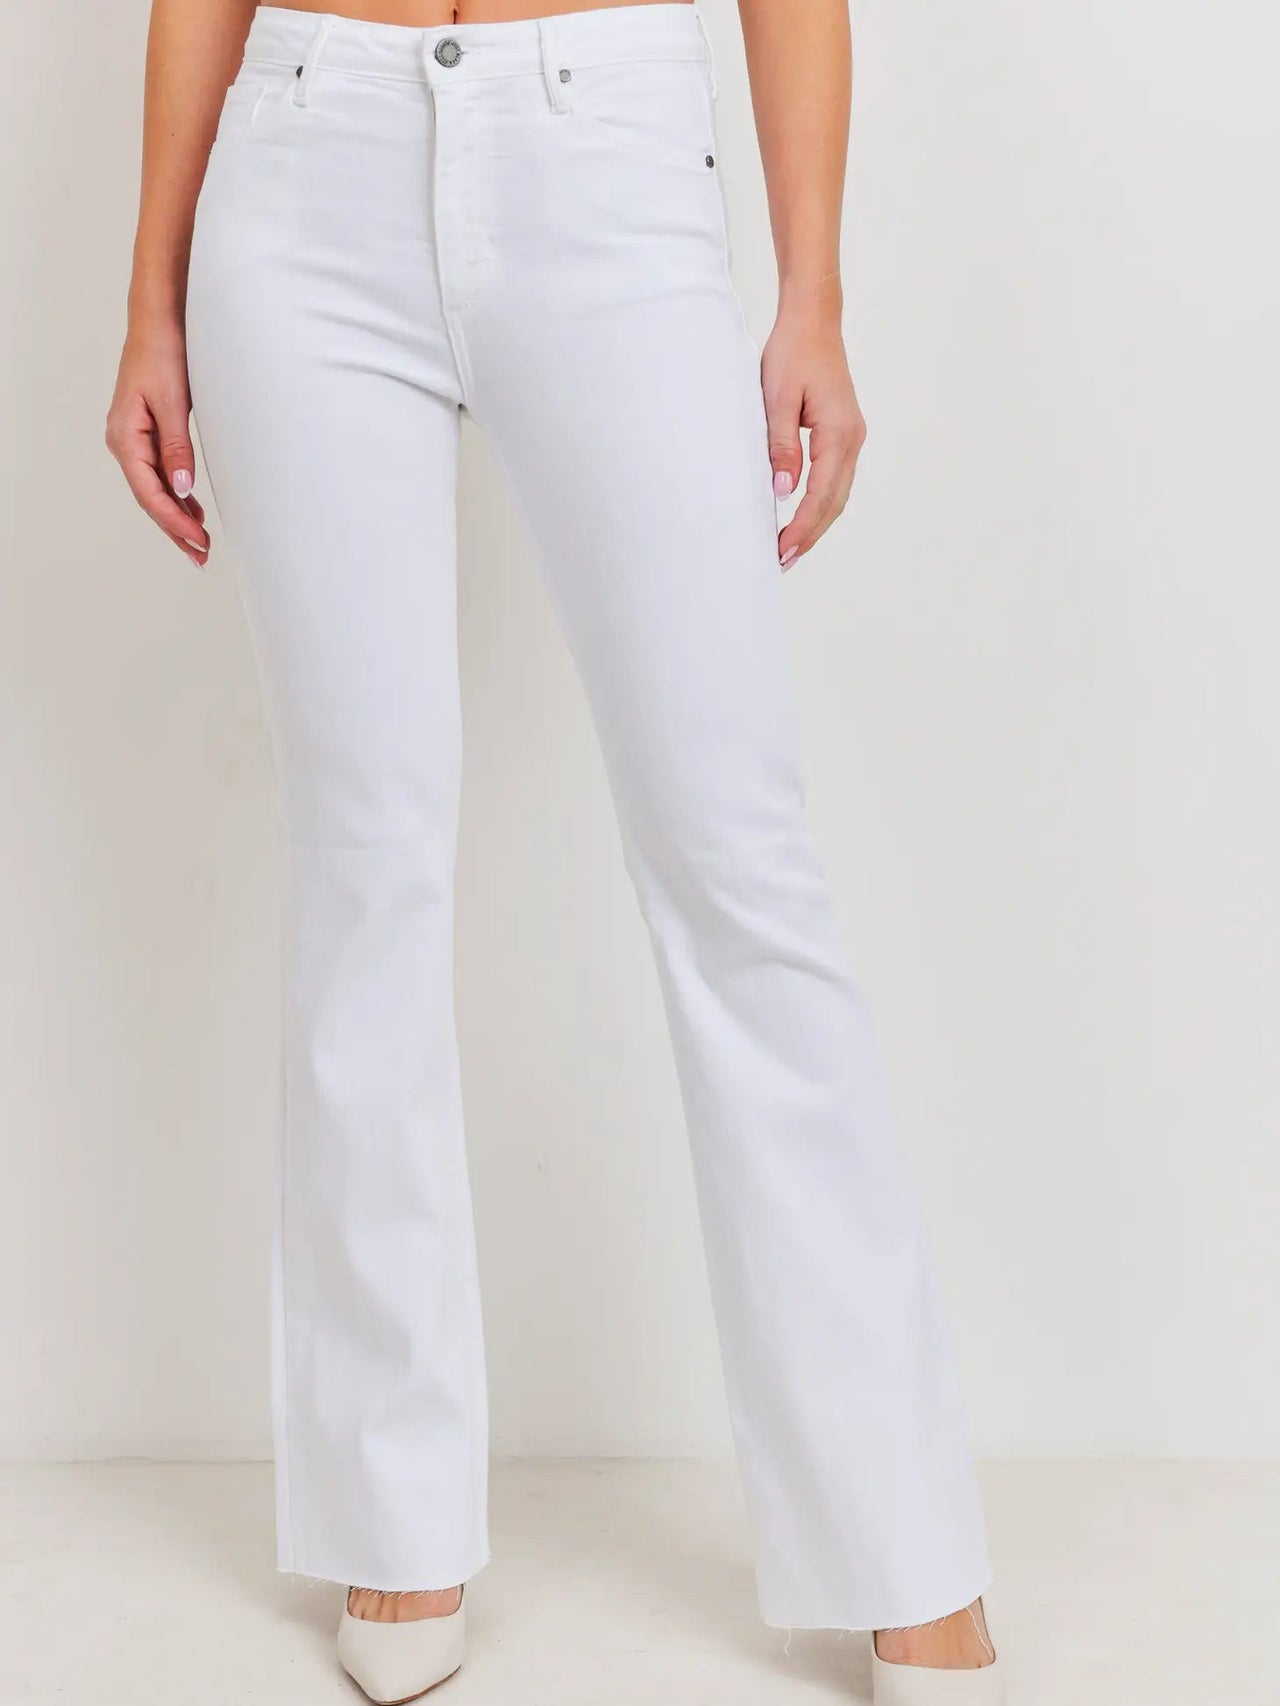 Dolly High Rise White Scissor Cut Flare Jeans, Bottoms by Just Black | LIT Boutique